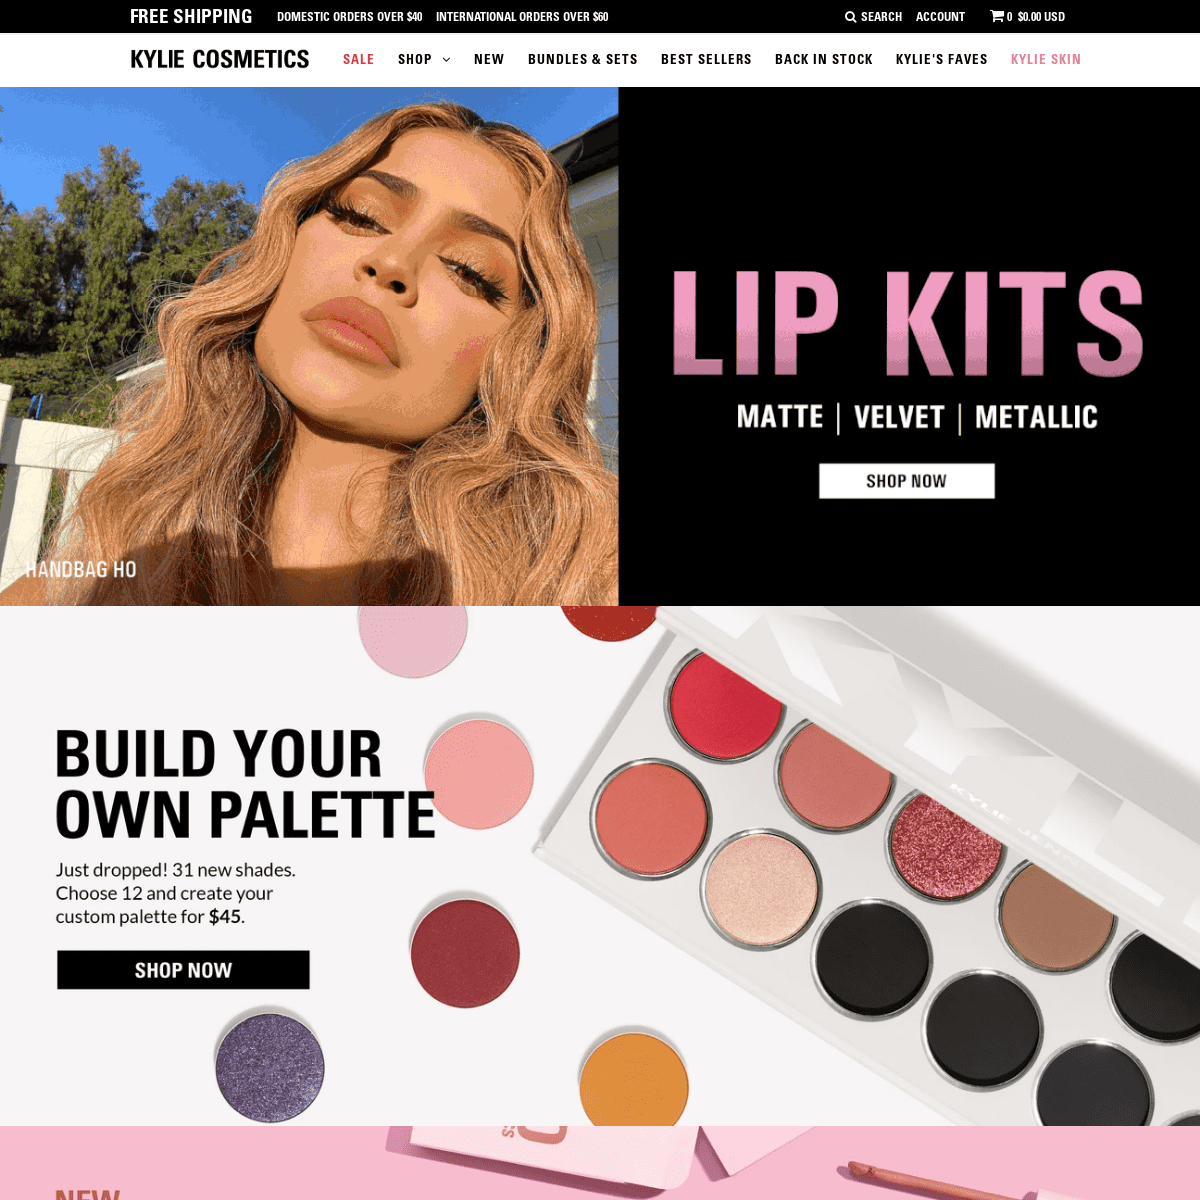 A complete backup of kyliecosmetics.com